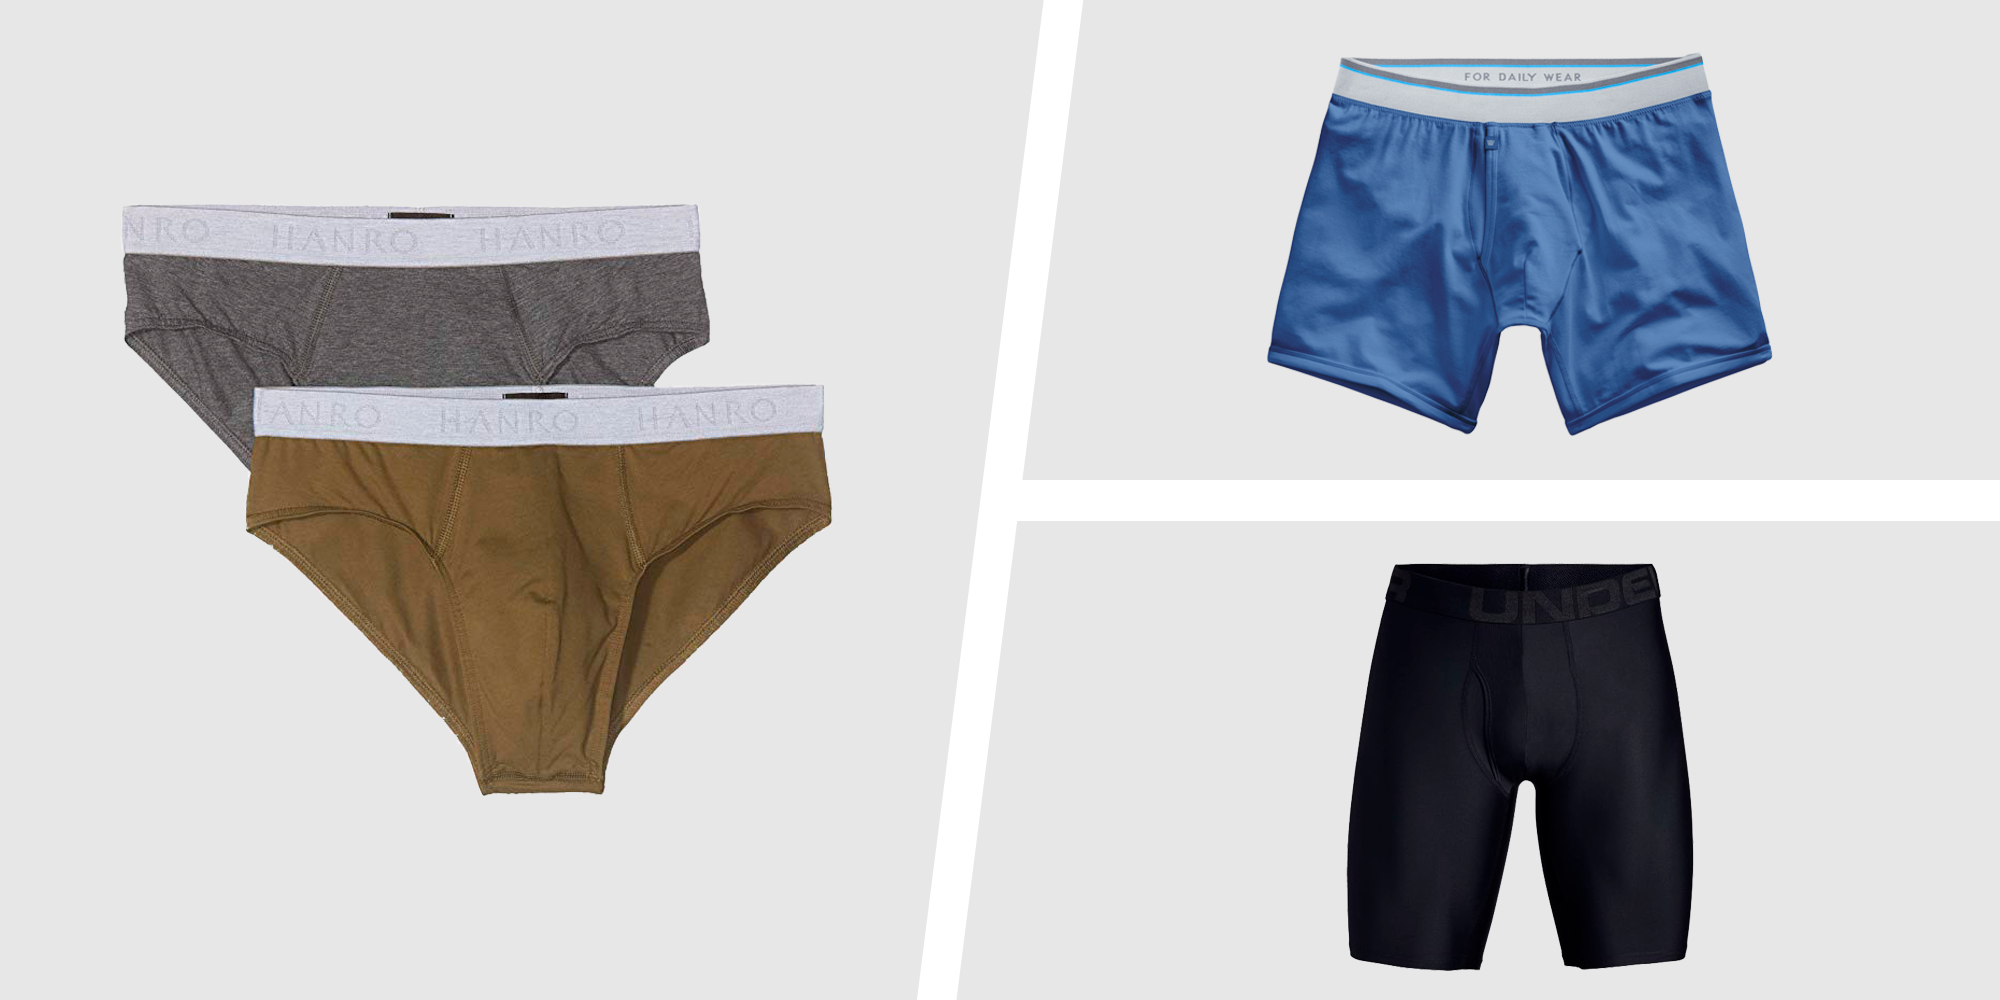 Comfort + Style = Bench Body Underwear. Look good and feel good in